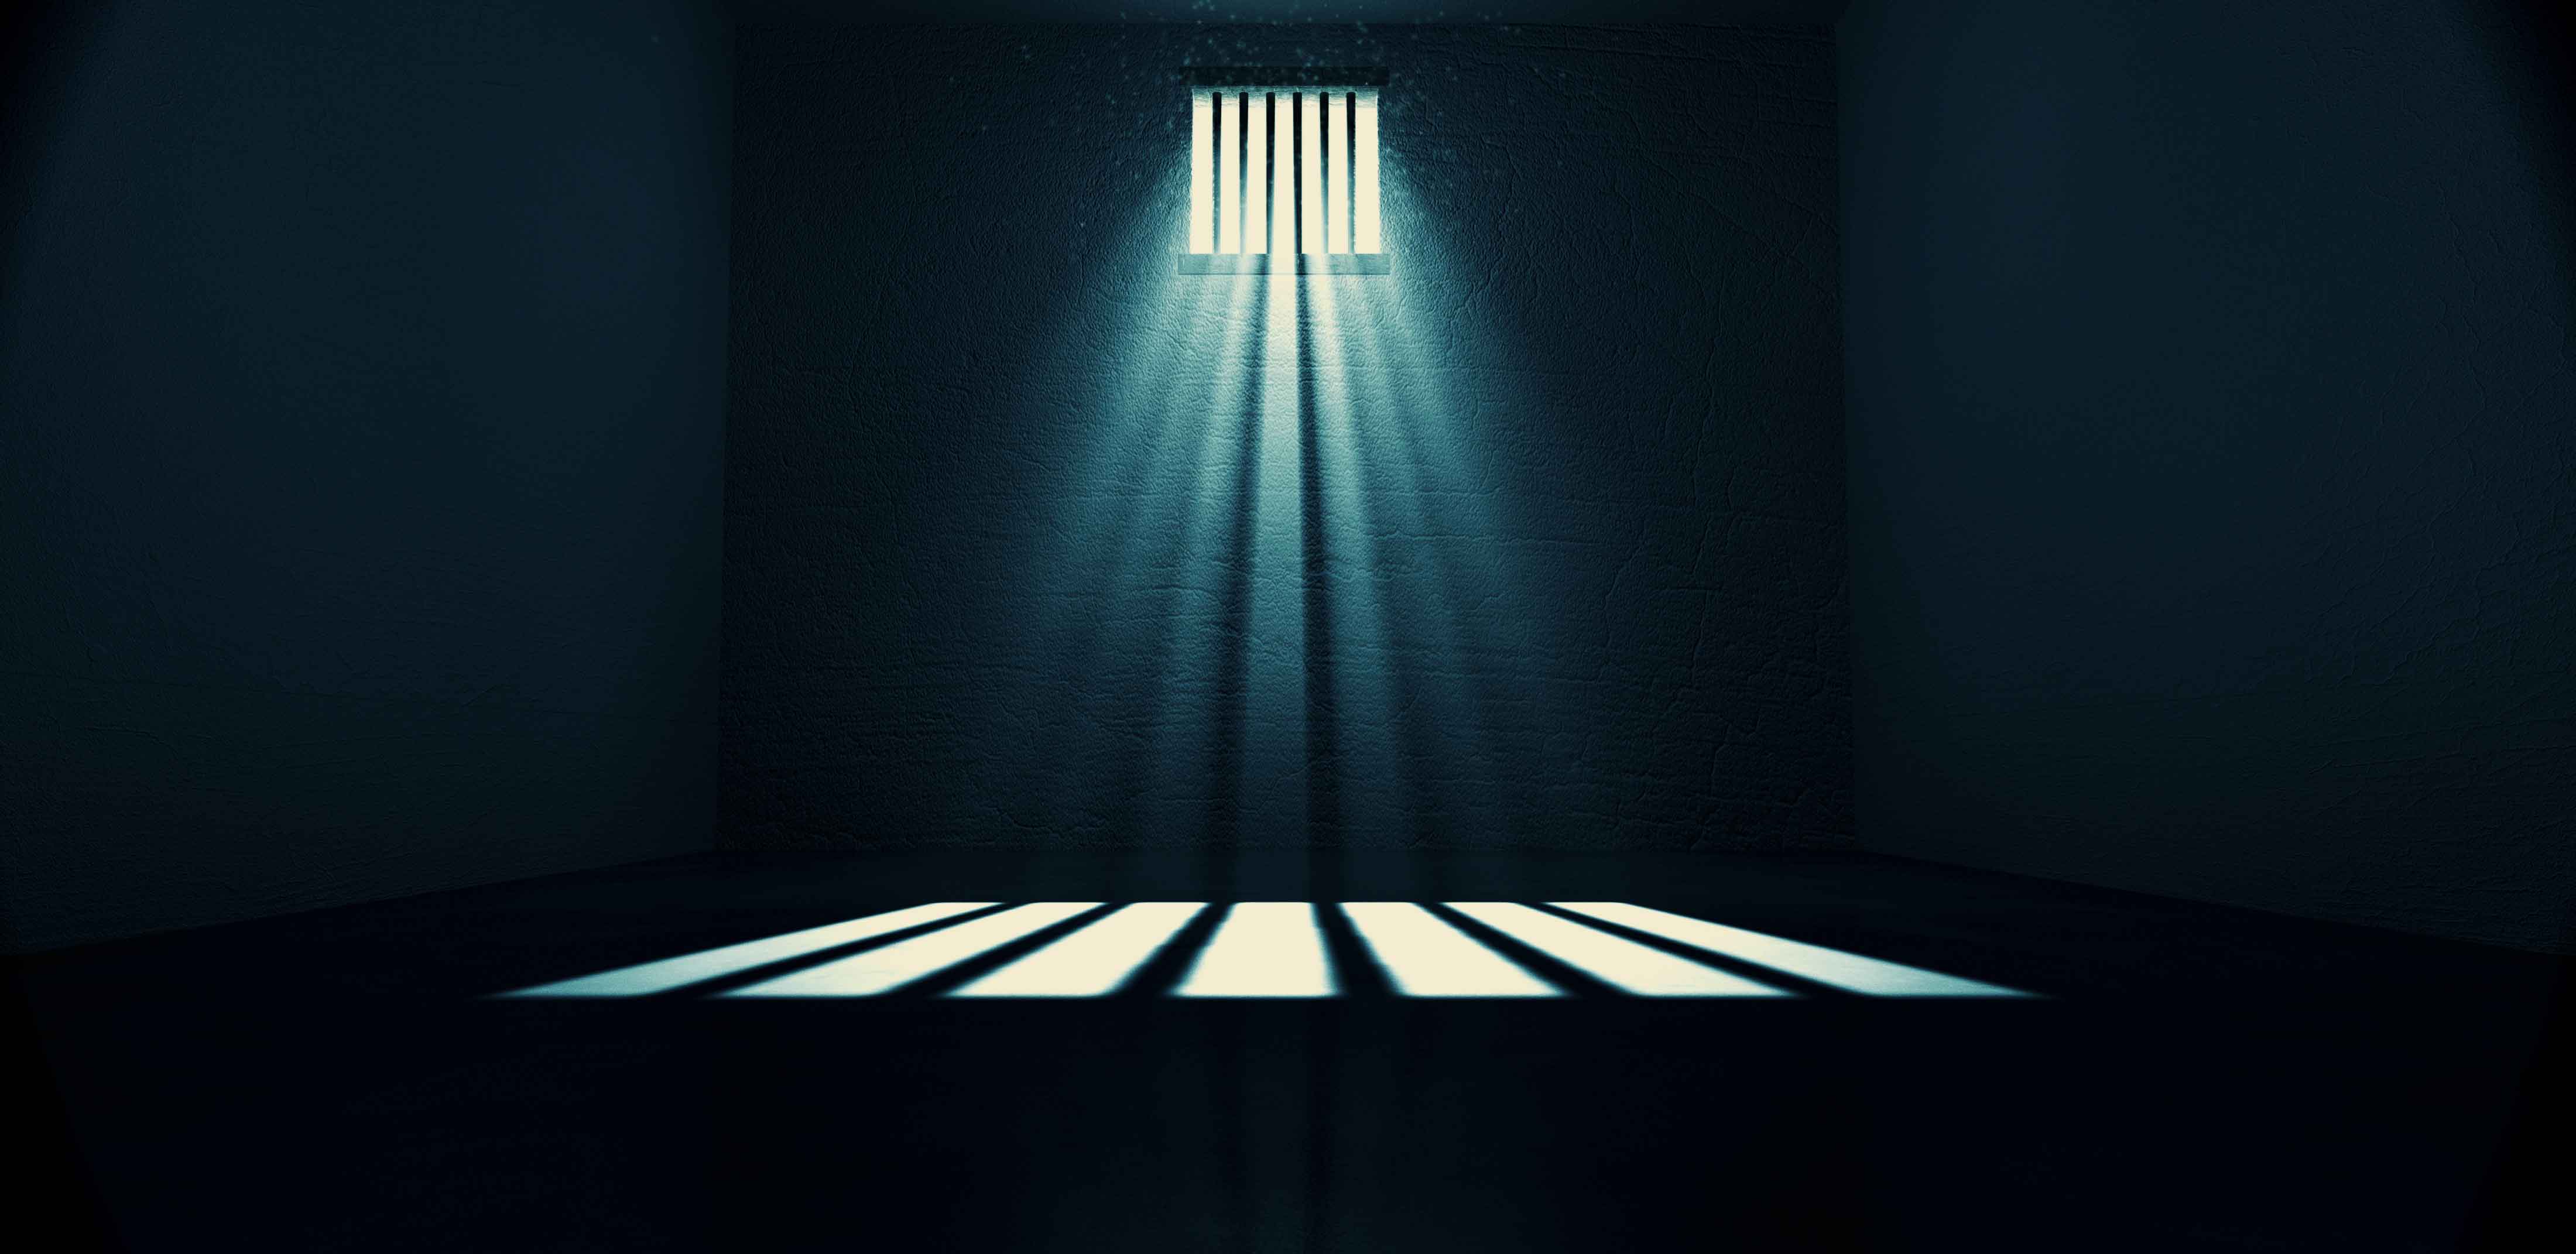 Gallery For Gt Jail Background